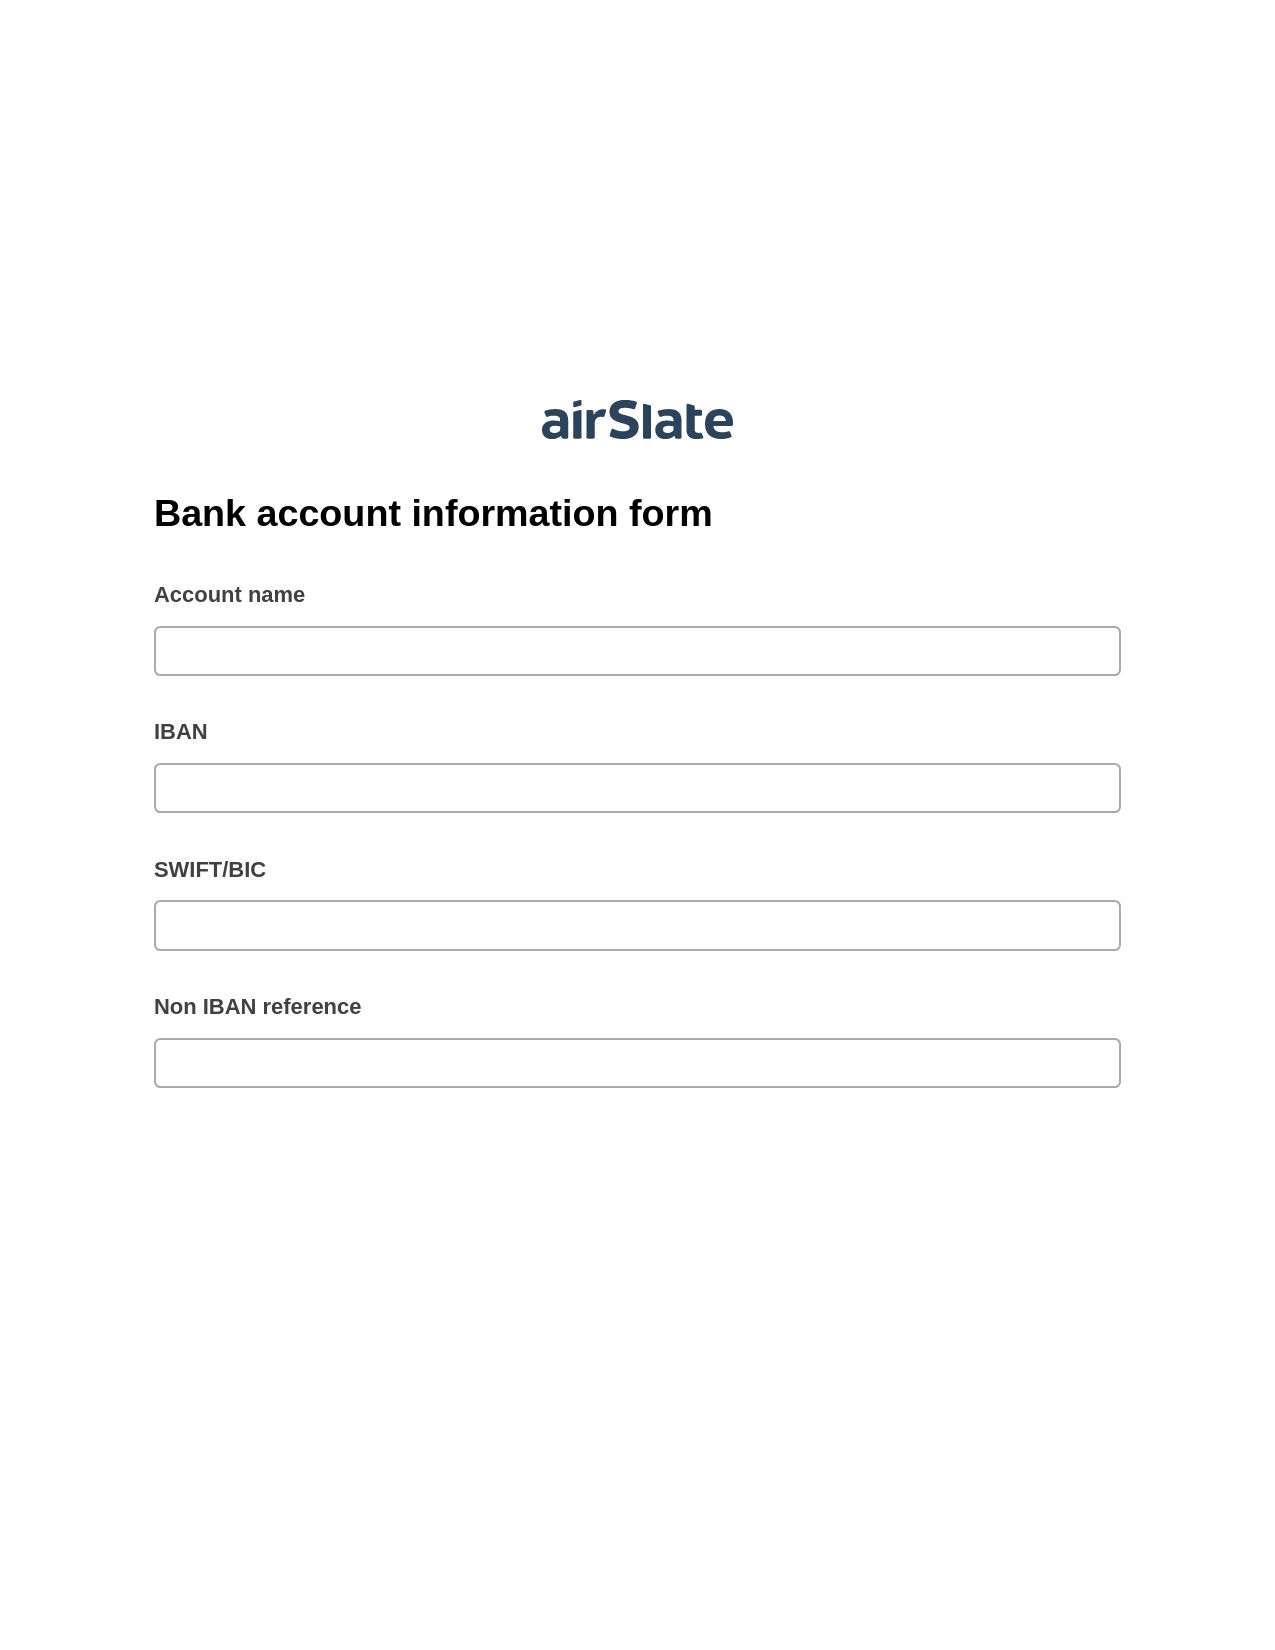 Bank account information form Pre-fill from Google Sheet Dropdown Options Bot, Update NetSuite Records Bot, Export to NetSuite Record Bot